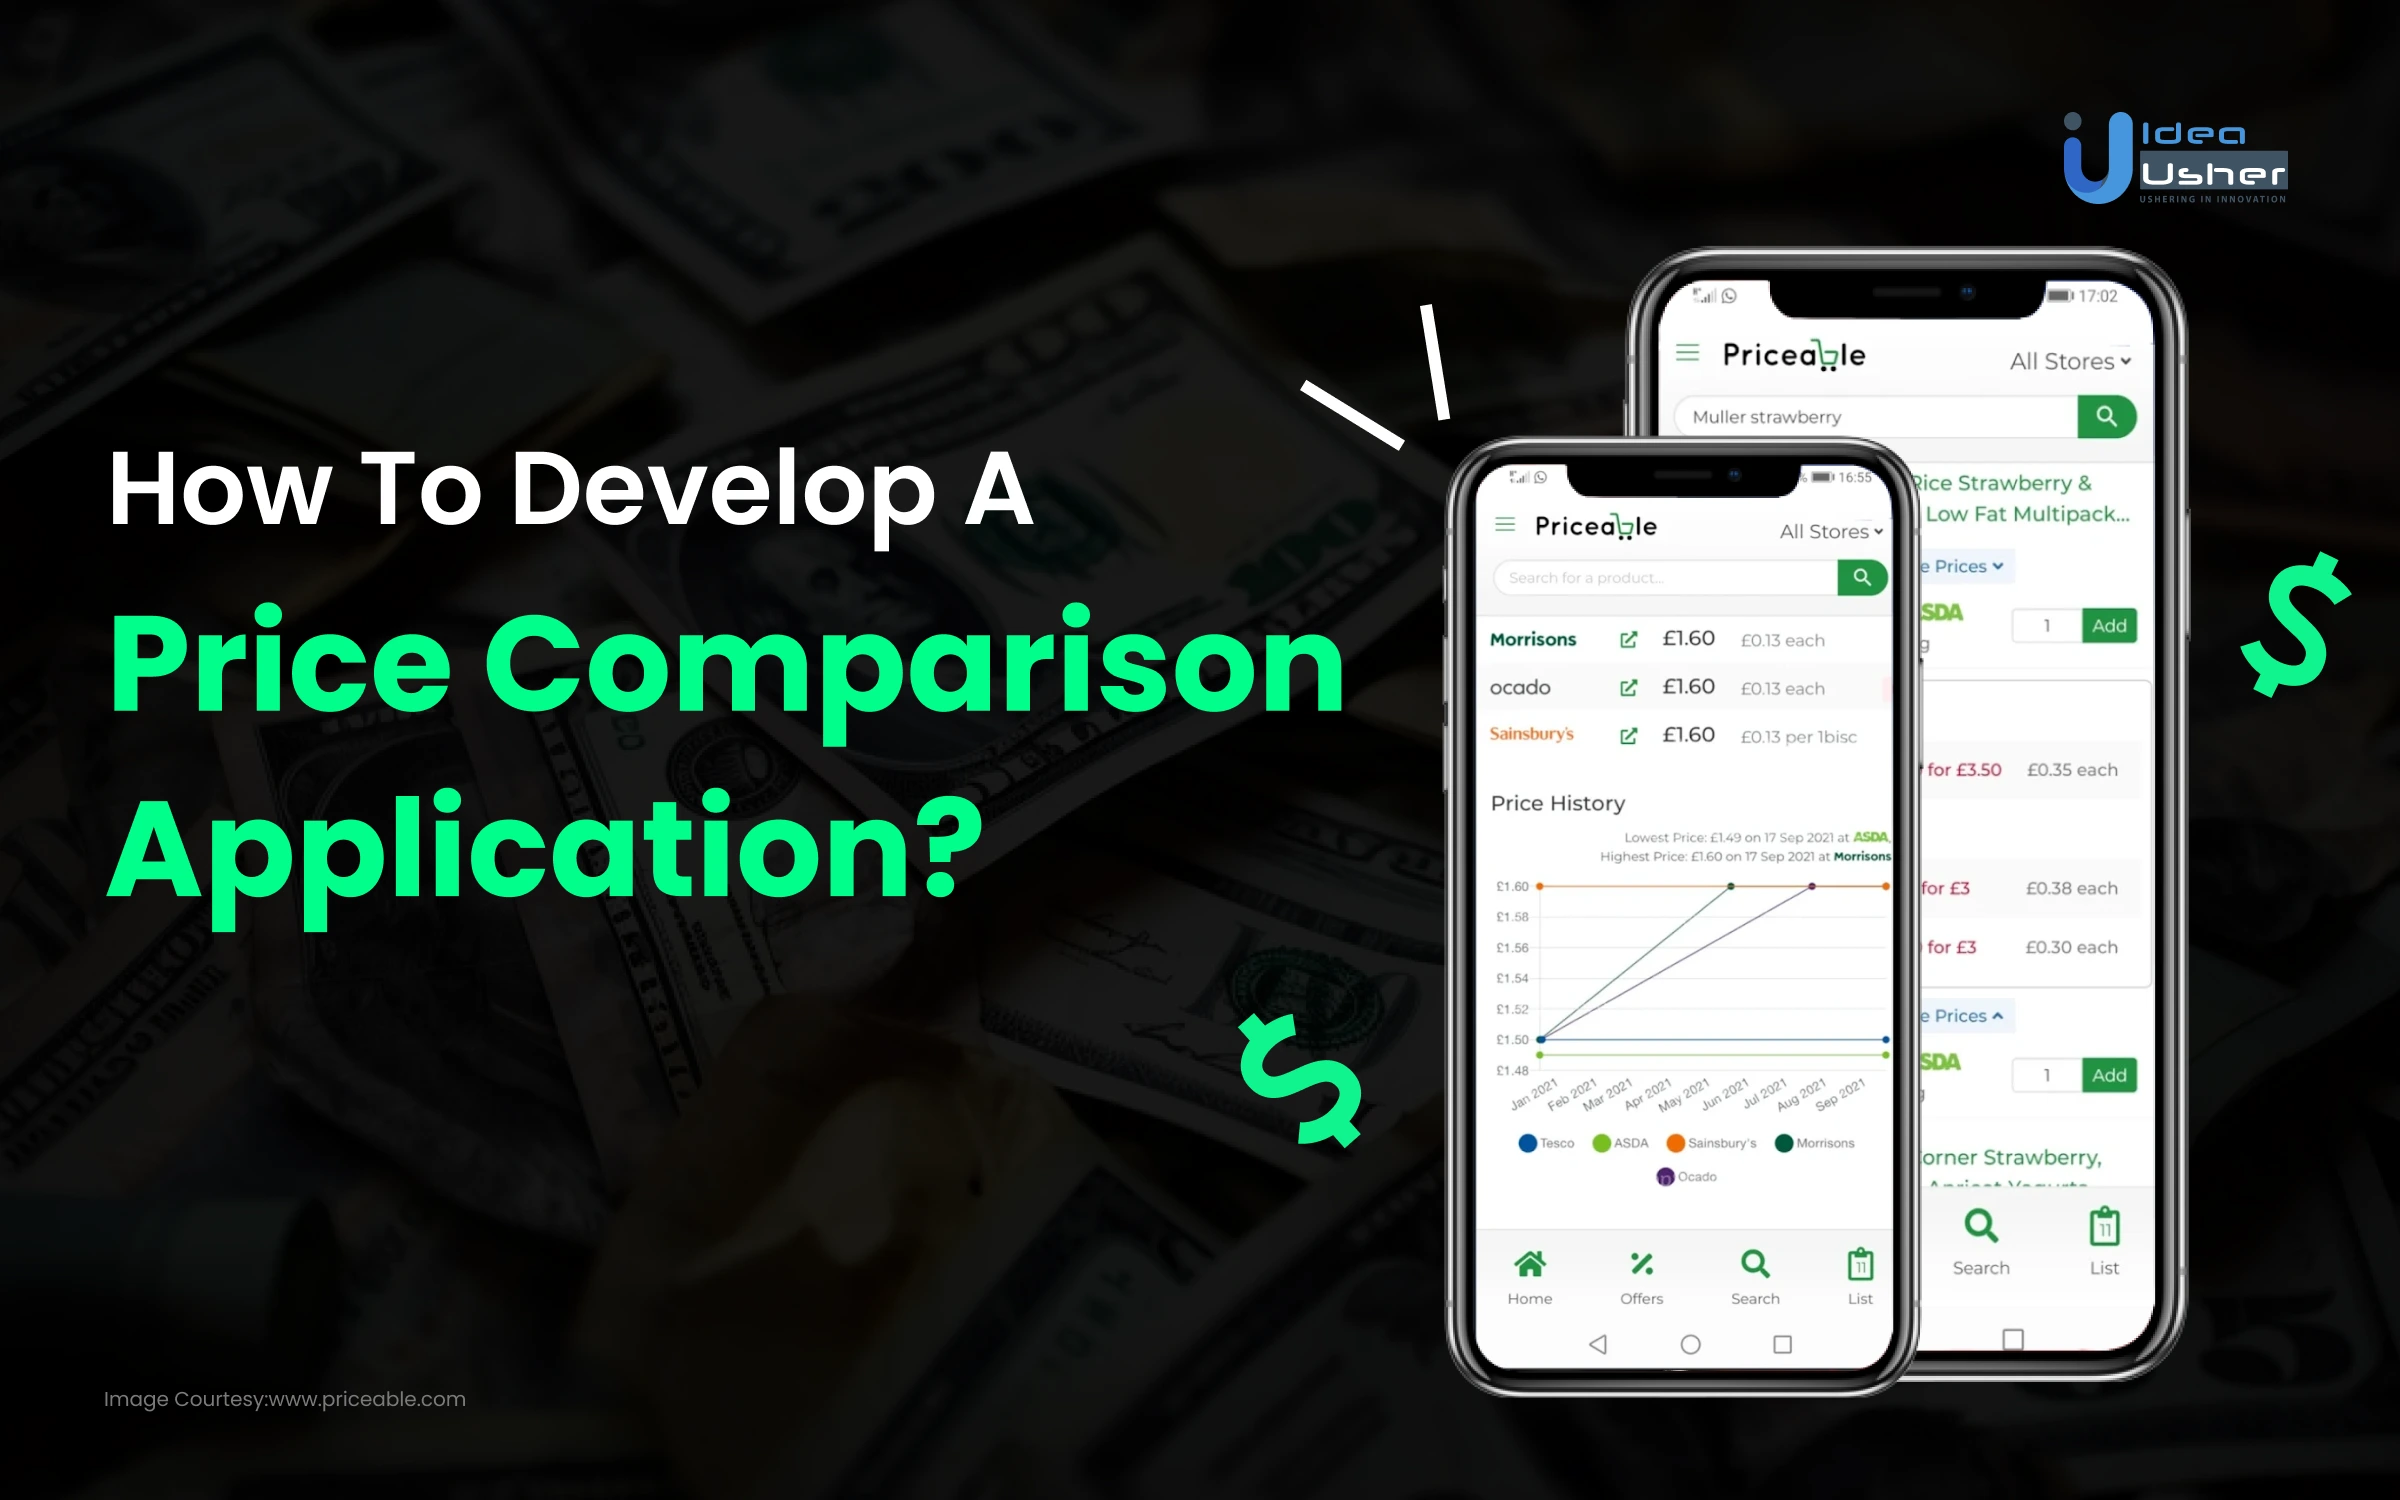 How To Develop a Price Comparison App